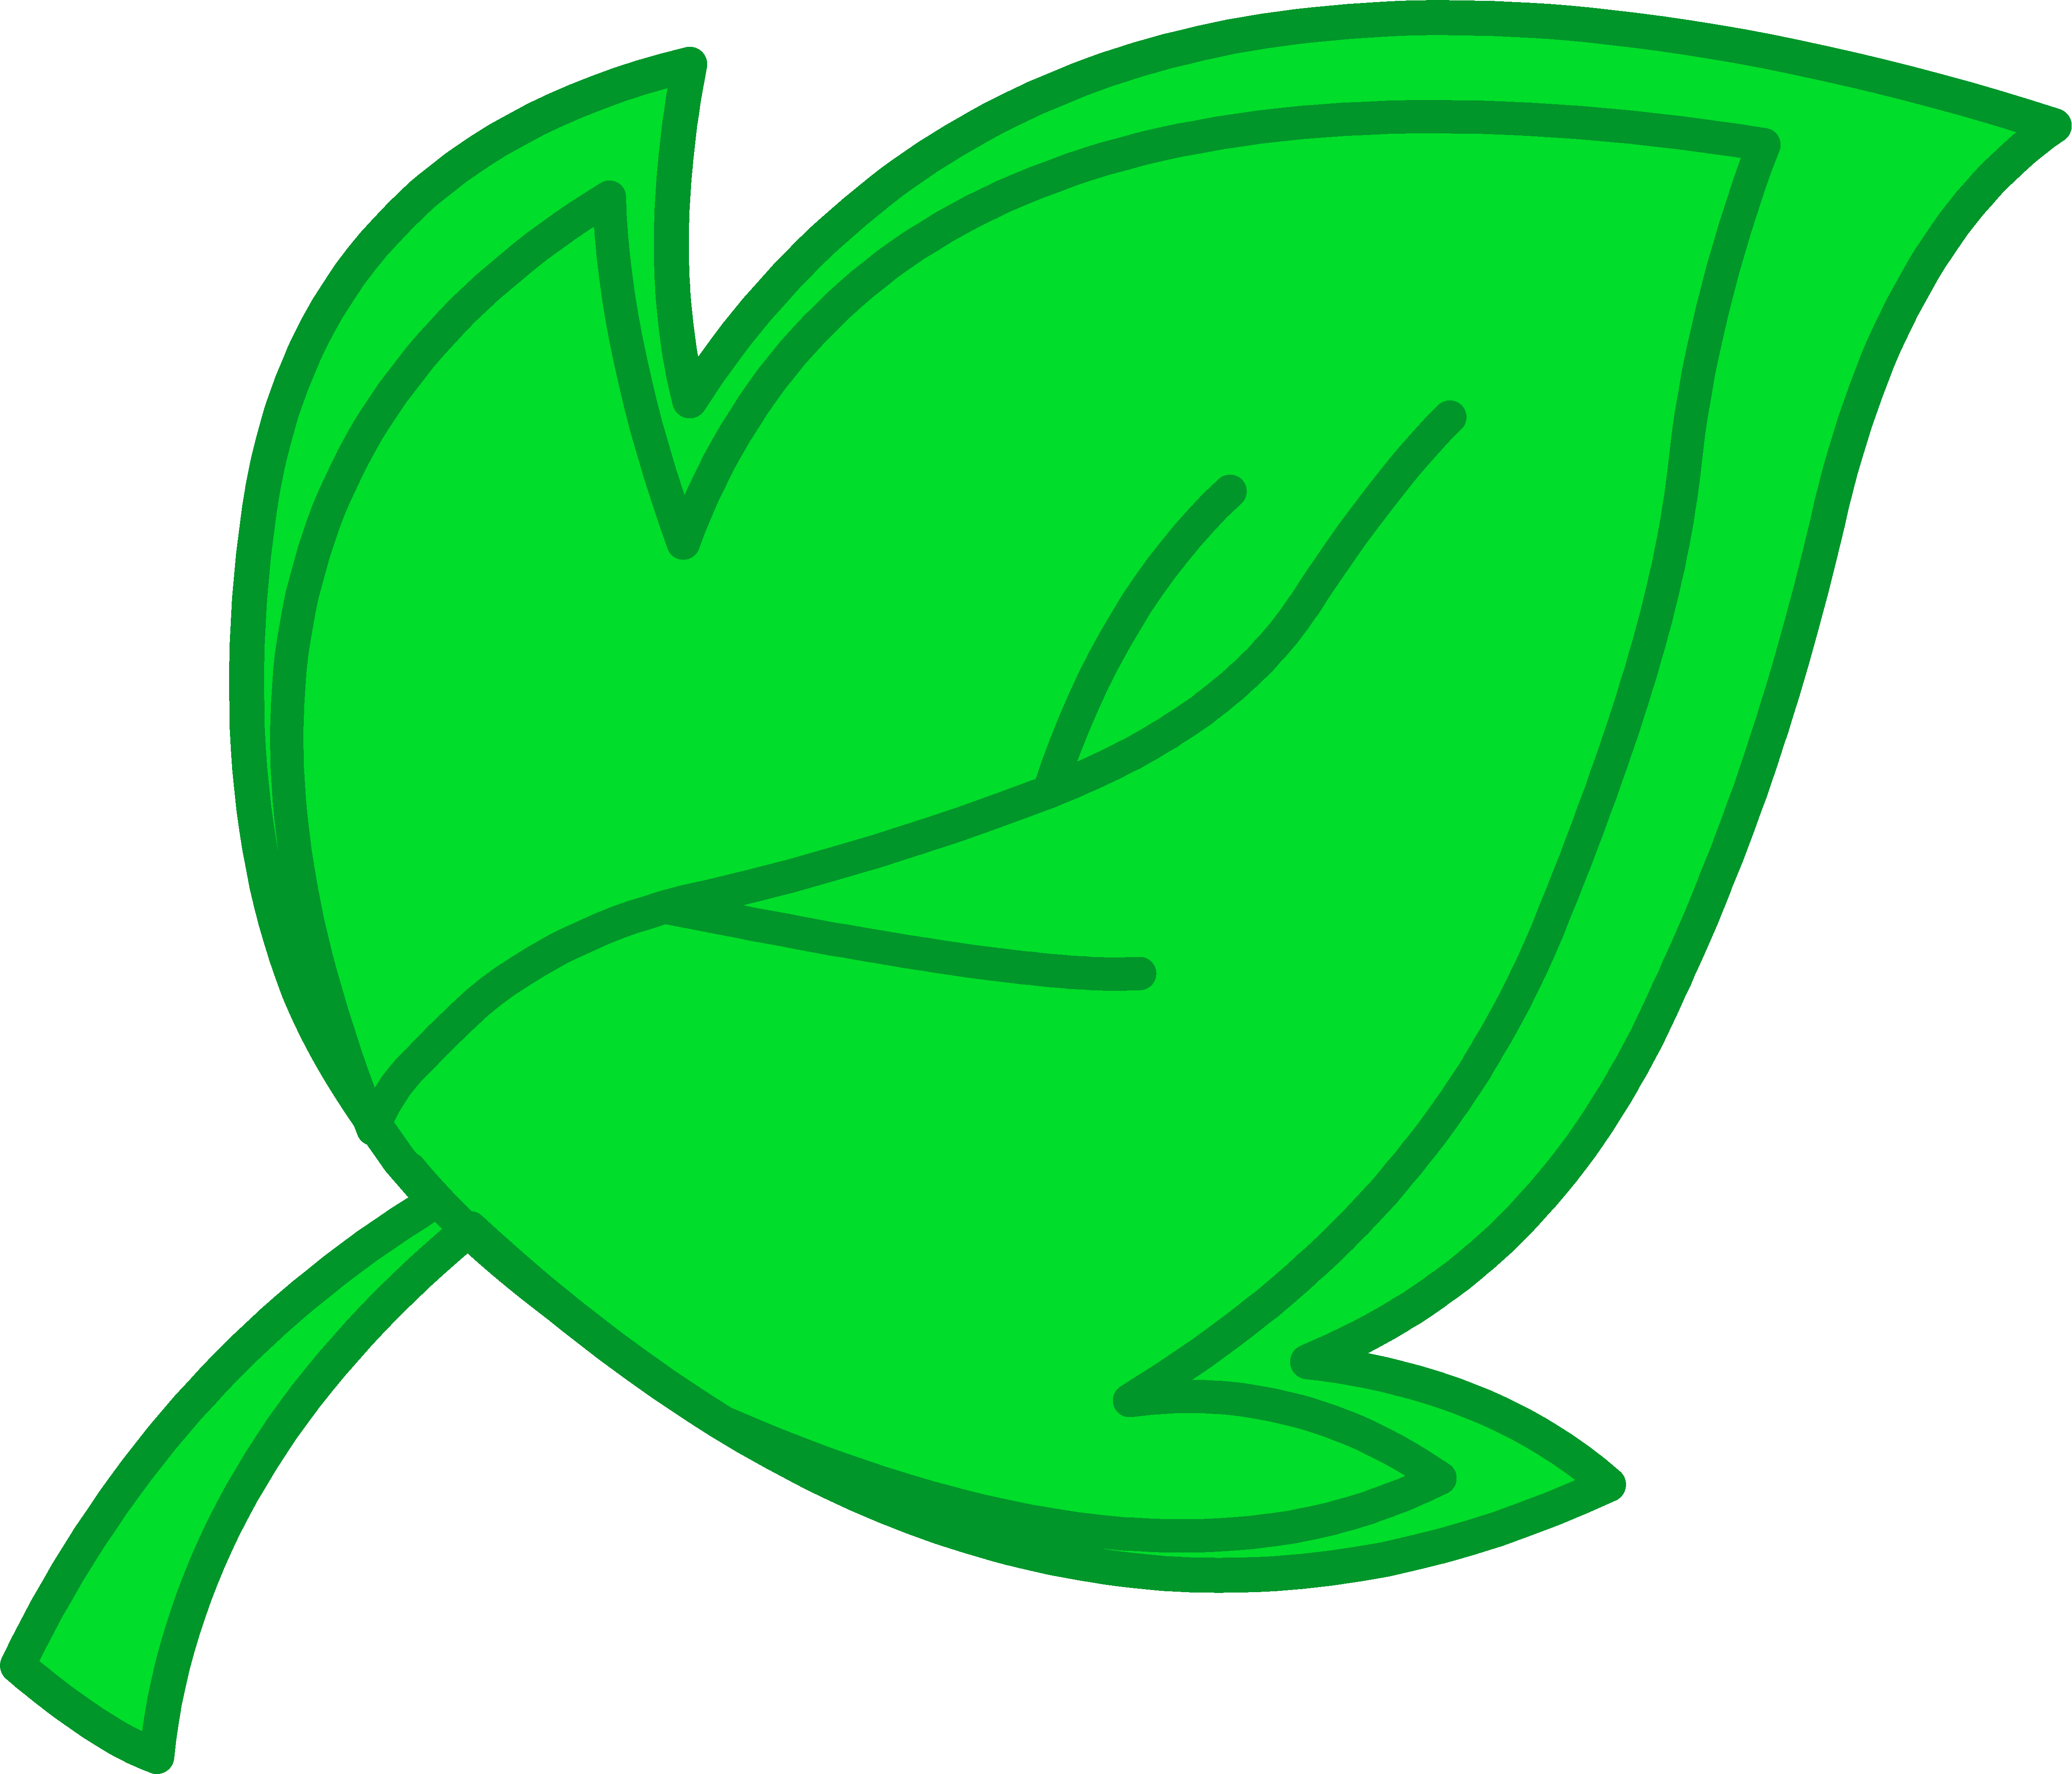 Green Leaf Clipart | Clipart Panda - Free Clipart Images